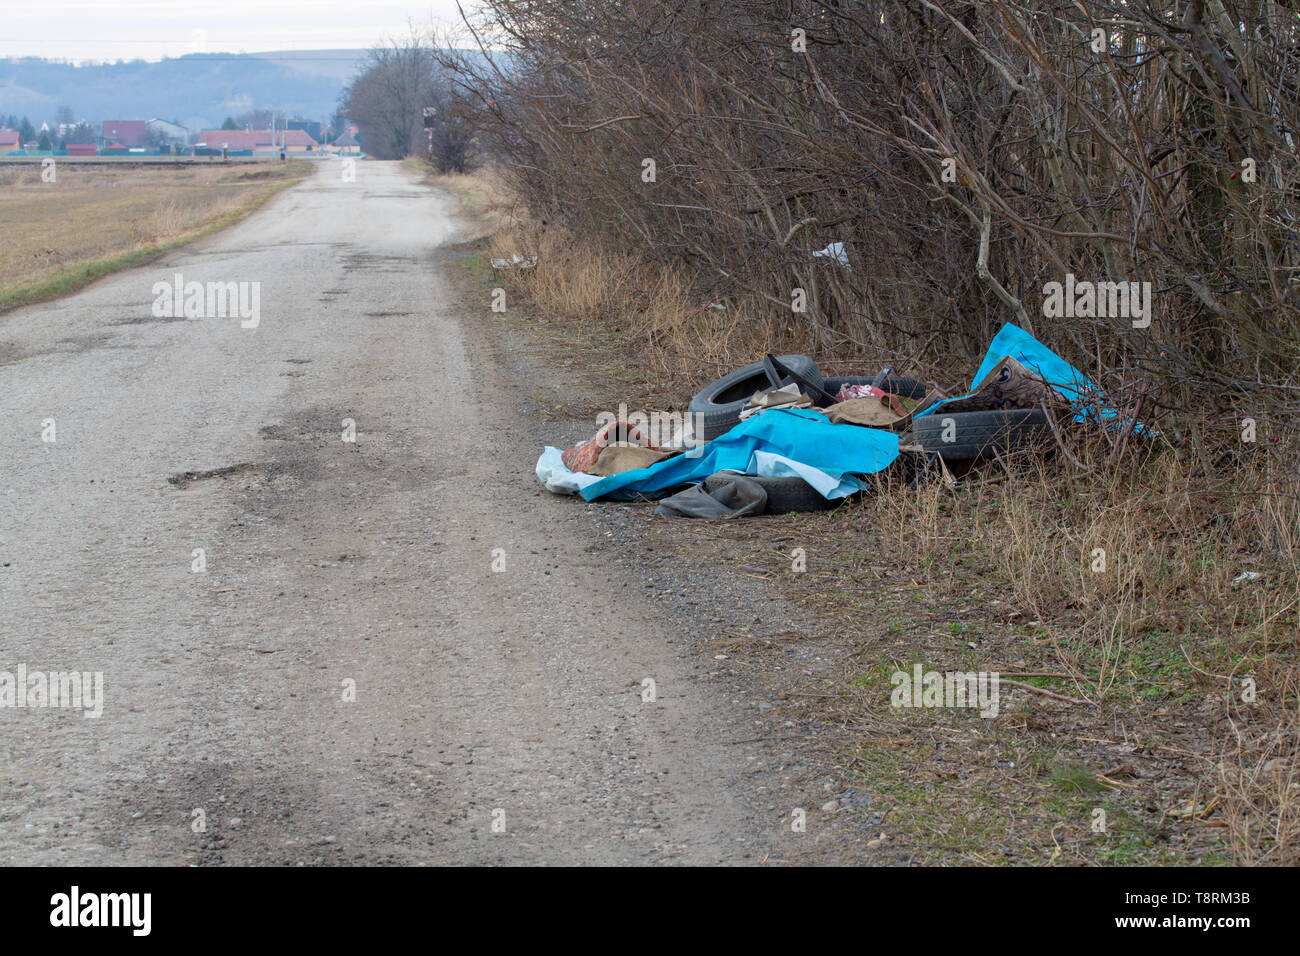 Fly tipped rubbish dumped in a lay-by in a country lane. Heap of illegally dumped household rubbish left on a side of the cart-road. Roadside fly tipp Stock Photo